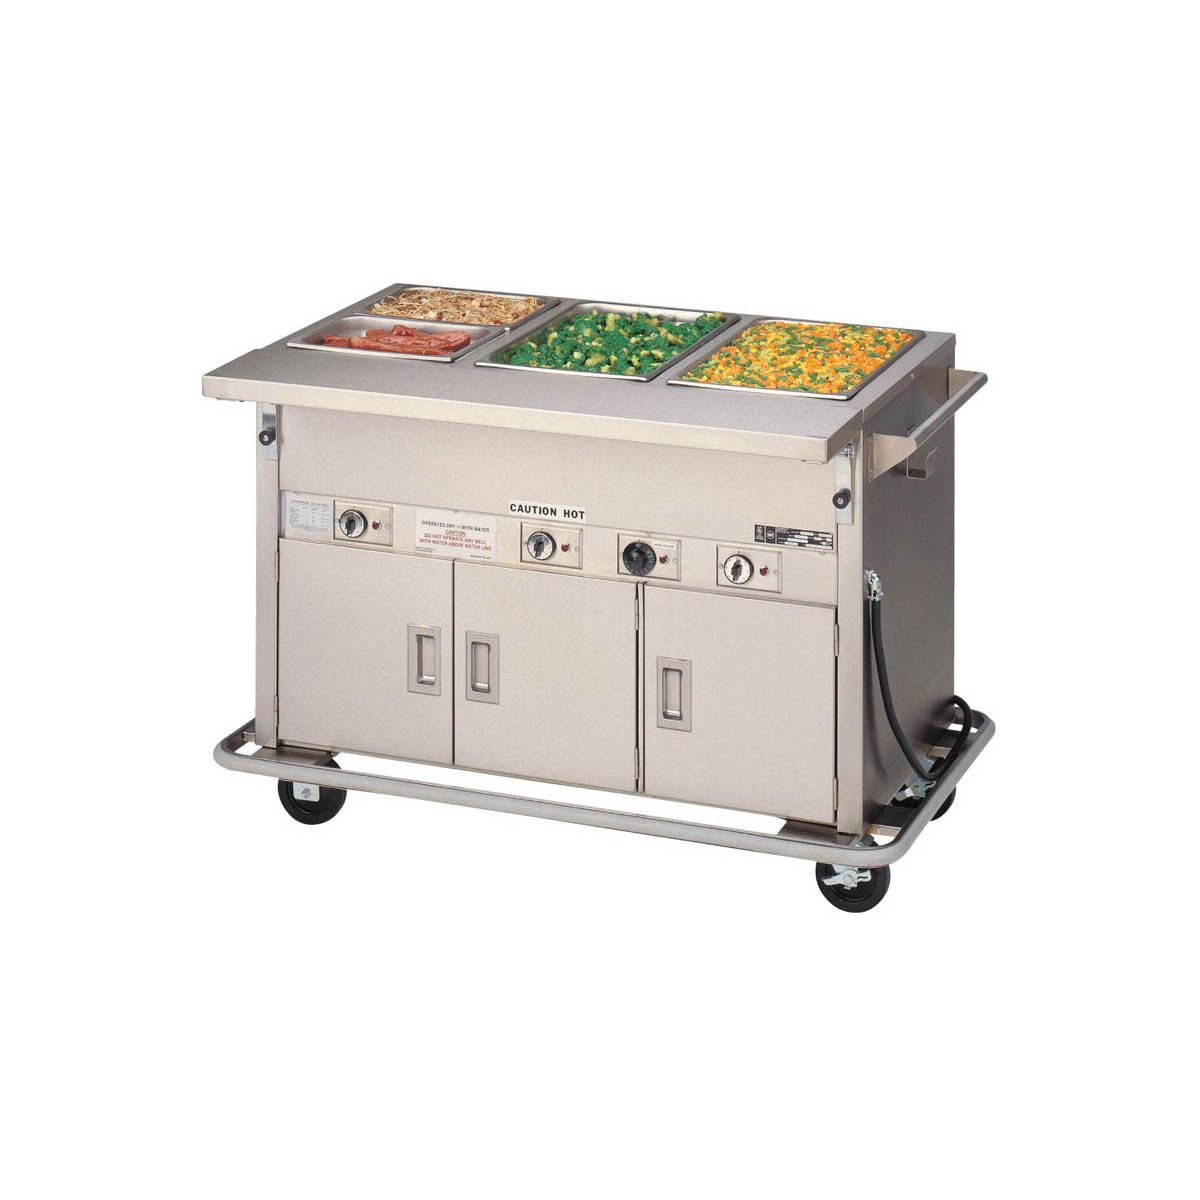 Piper Products DME-3-PTS Electric Hot Food Serving Counter